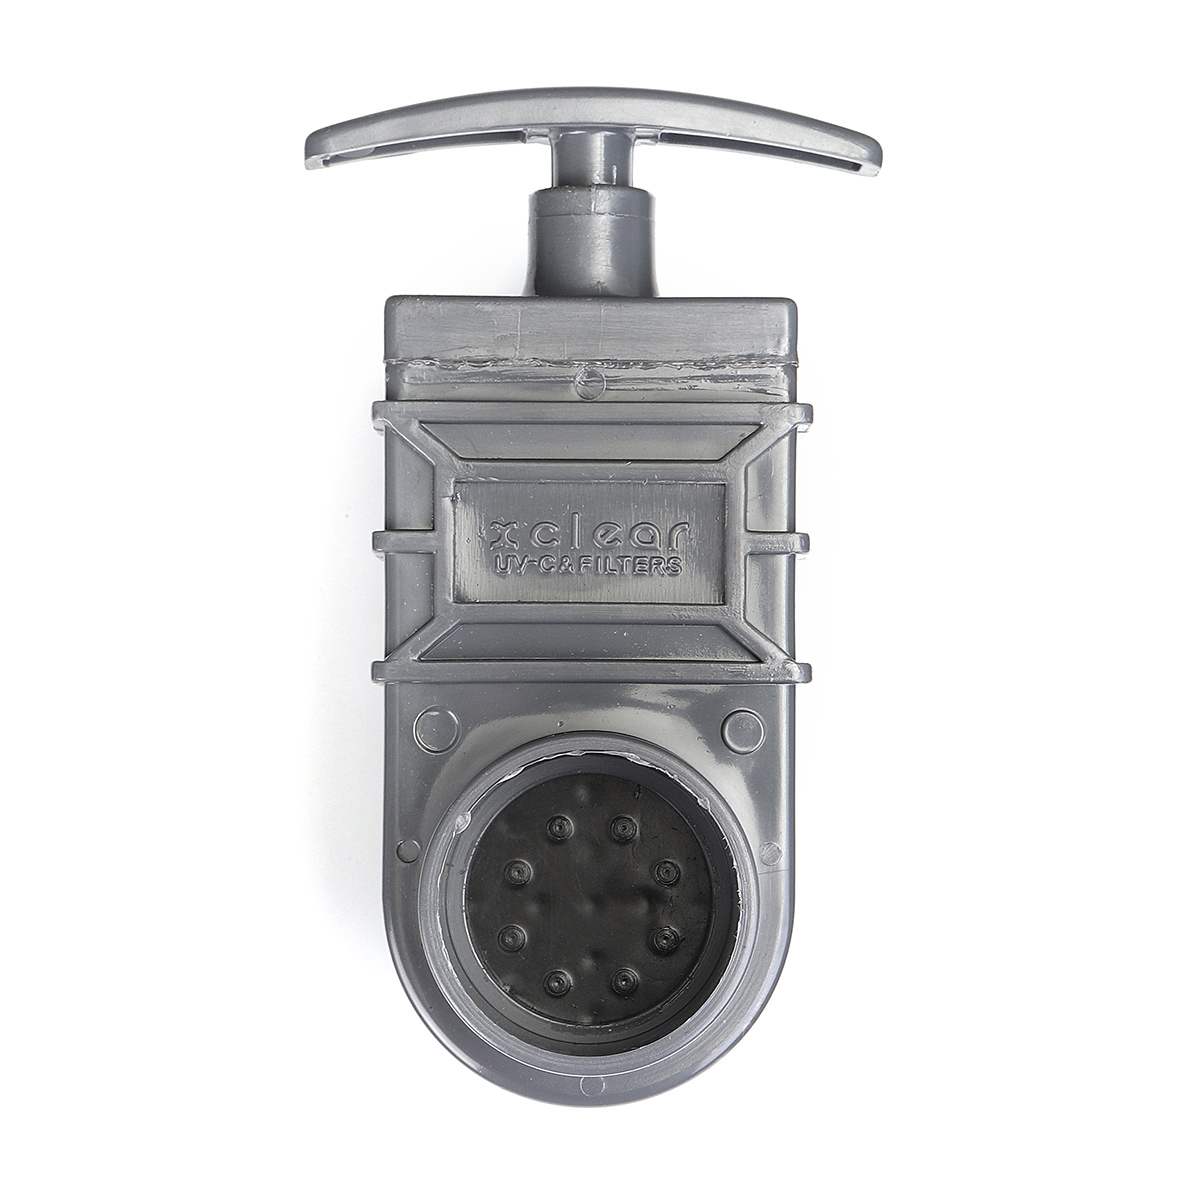 DN32-Upvc-EPDM-Stainless-Steel-Sewage-Gate-Valve-Industry-UPVC-Pull-Plate-Mixing-Valves-035Mpa-1351256